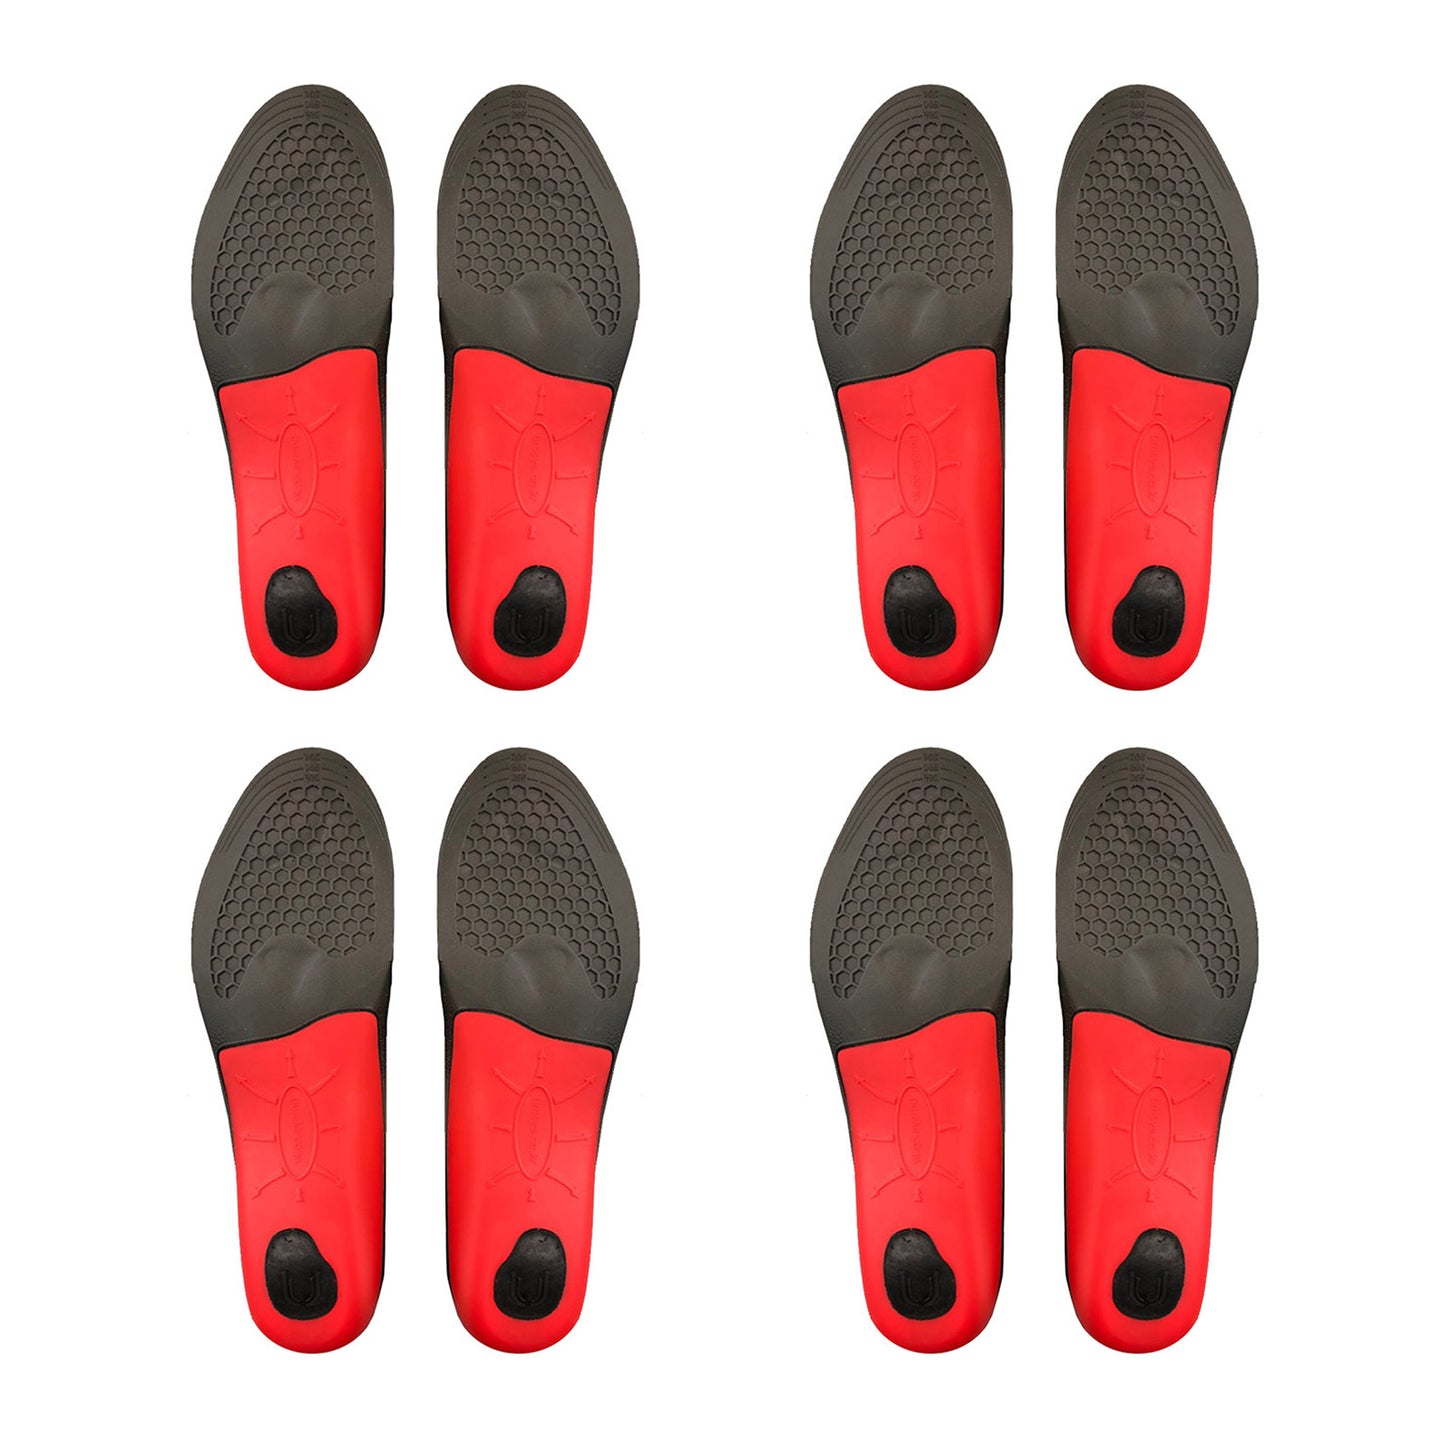 Bibal Insole 4X Pair M Size Full Whole Insoles Shoe Inserts Arch Support Foot Pads